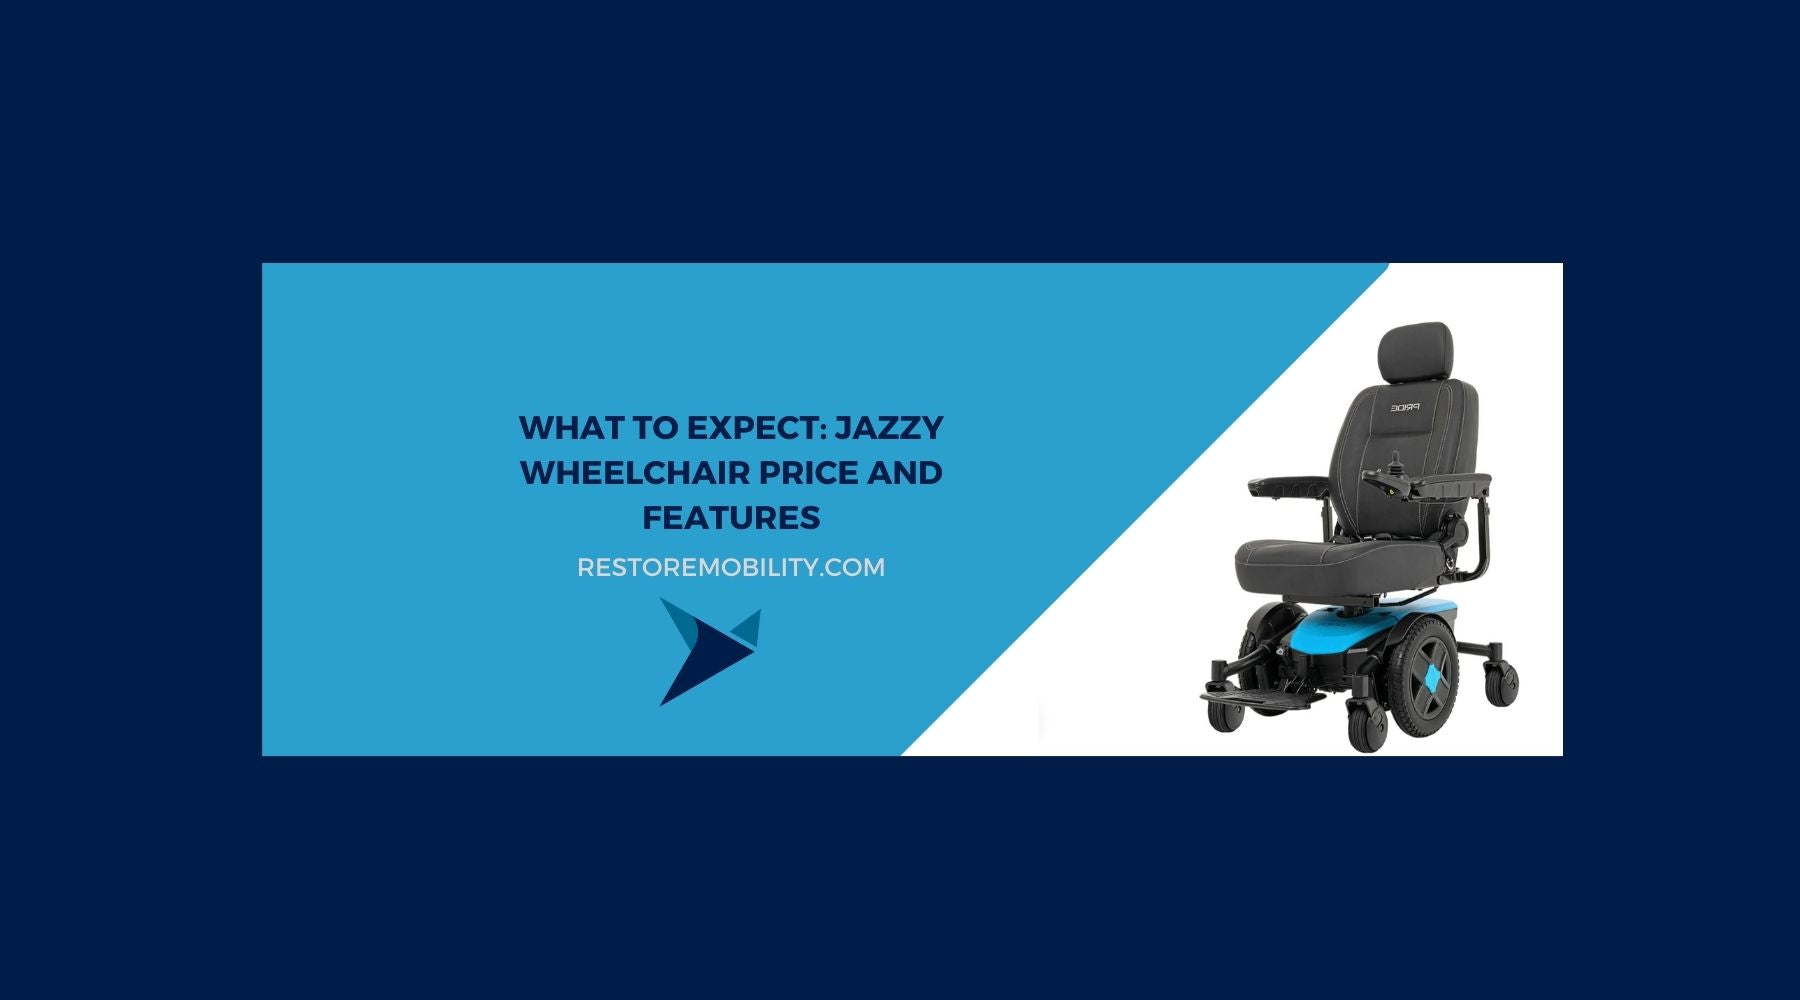 What to Expect: Jazzy Wheelchair Price and Features